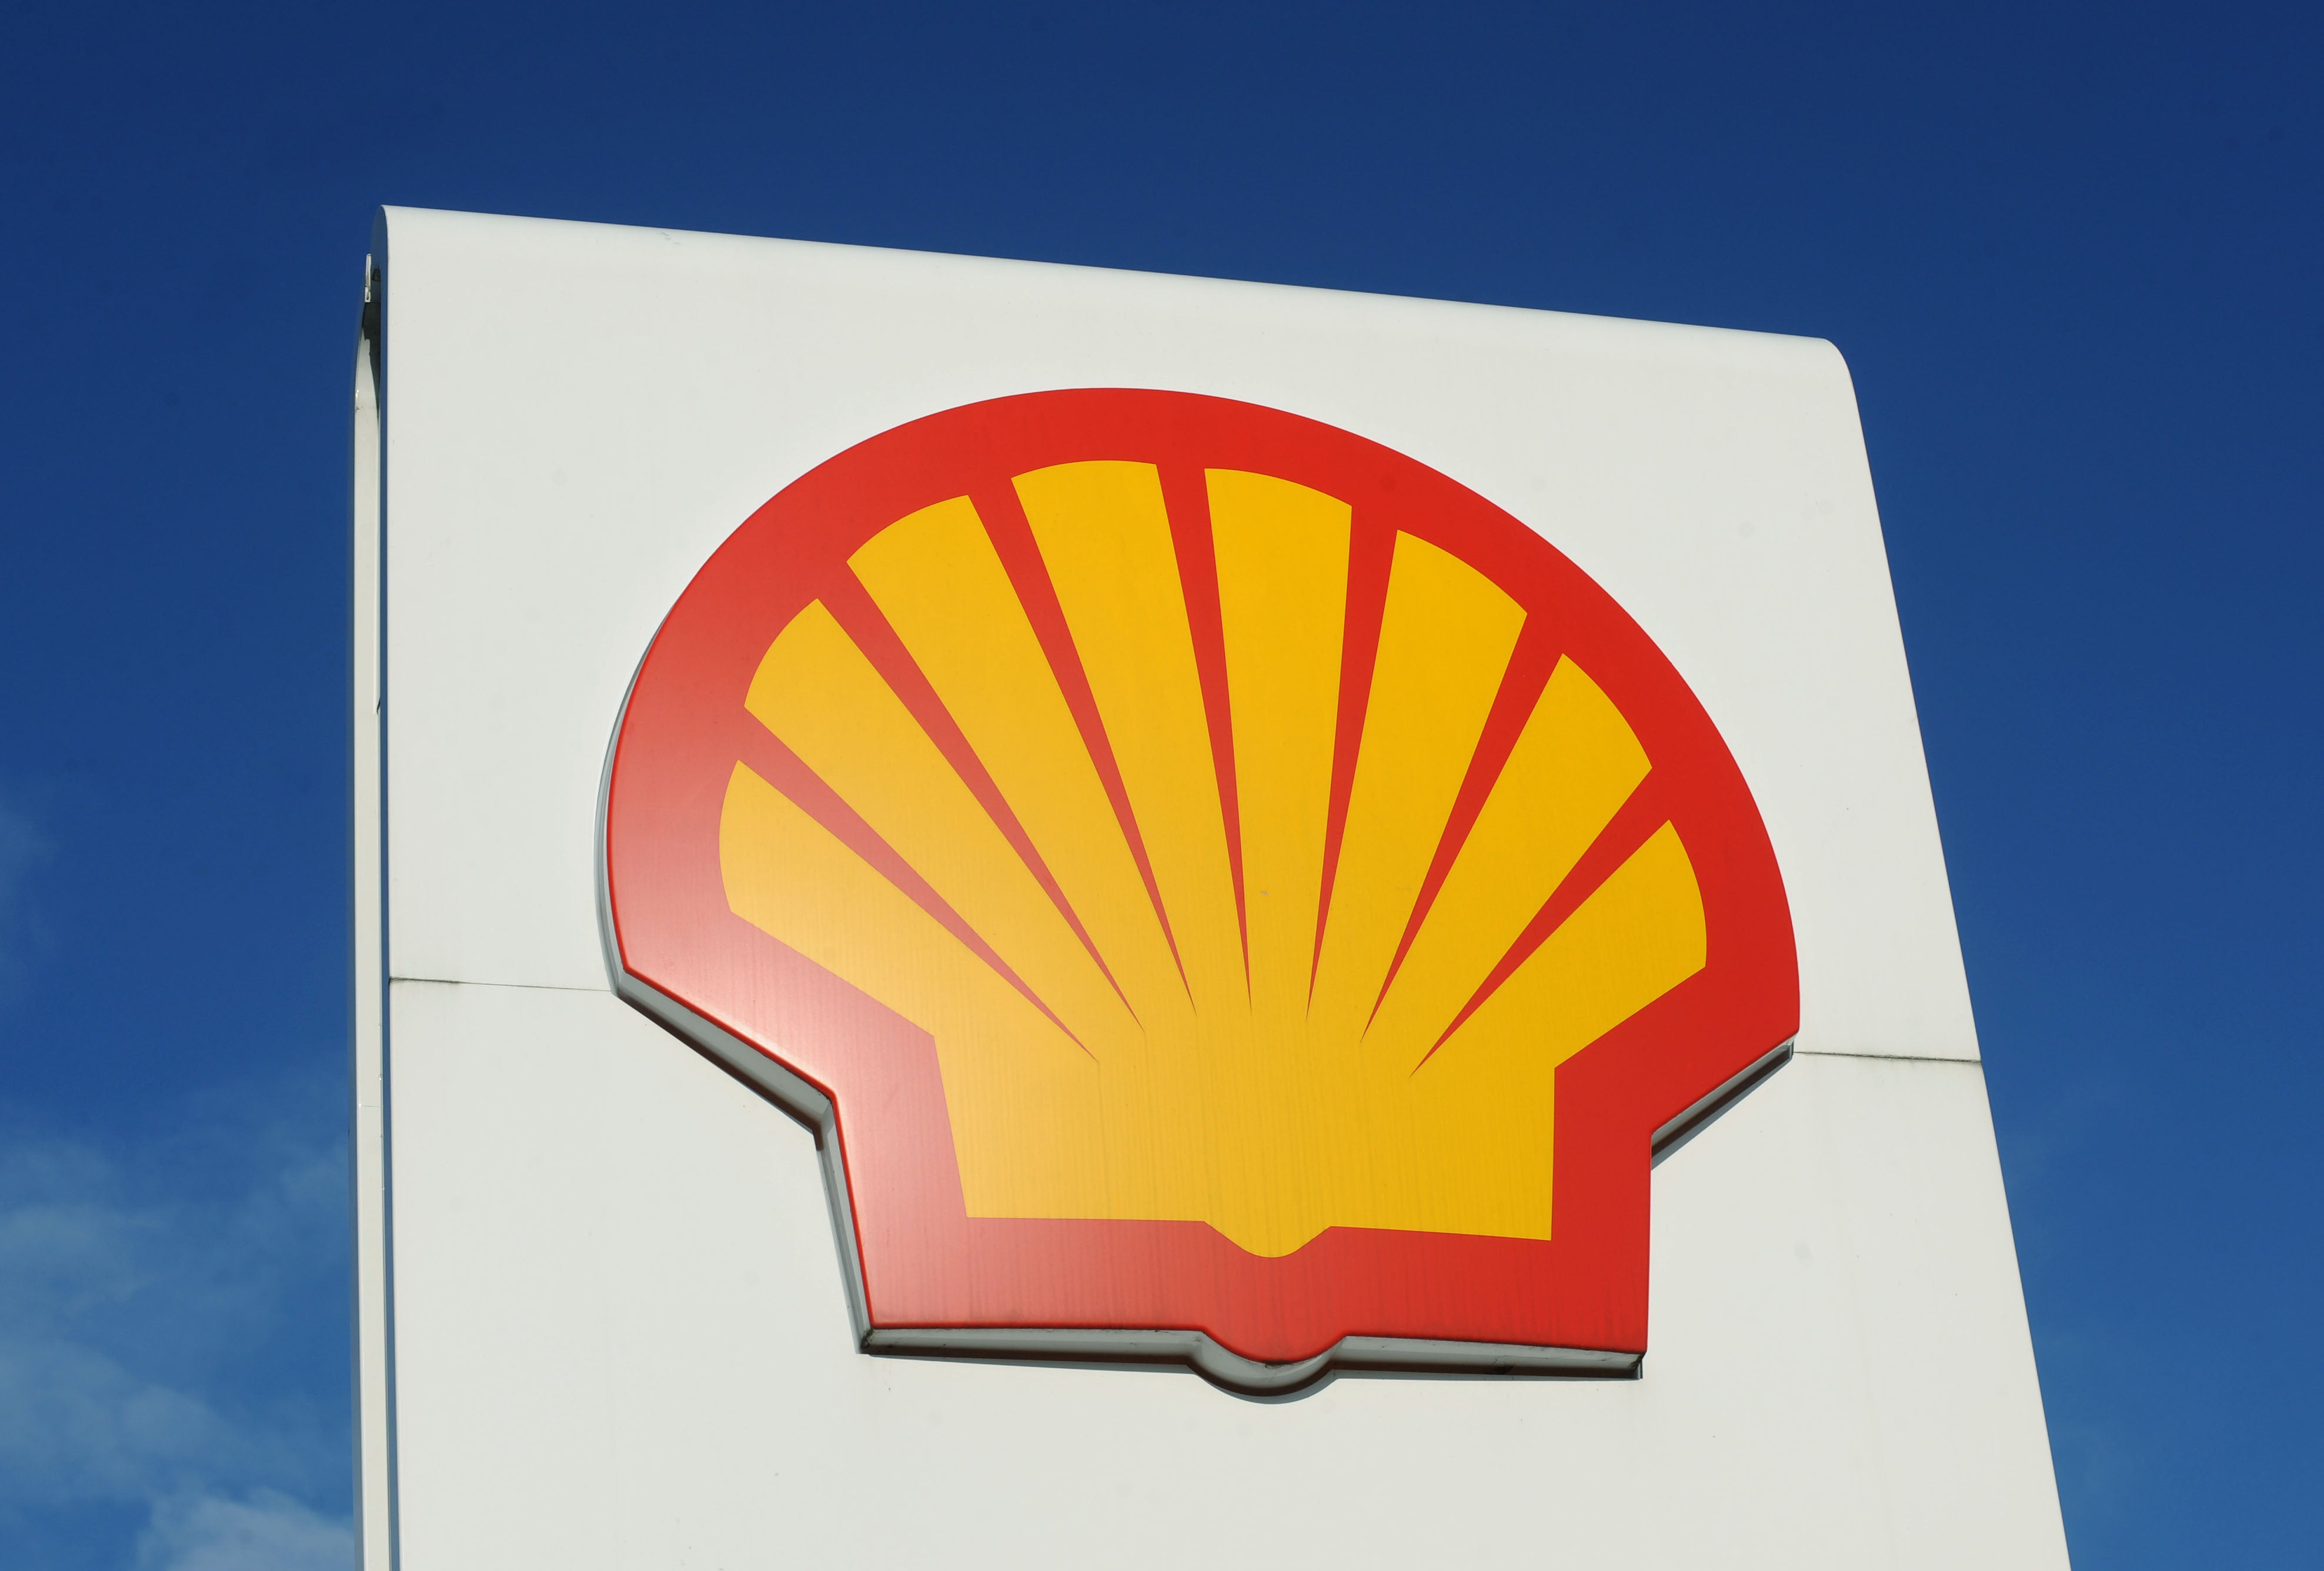 Oil giant Shell has been criticised by Ukraine’s foreign minister for making a purchase from Russia this week despite the invasion